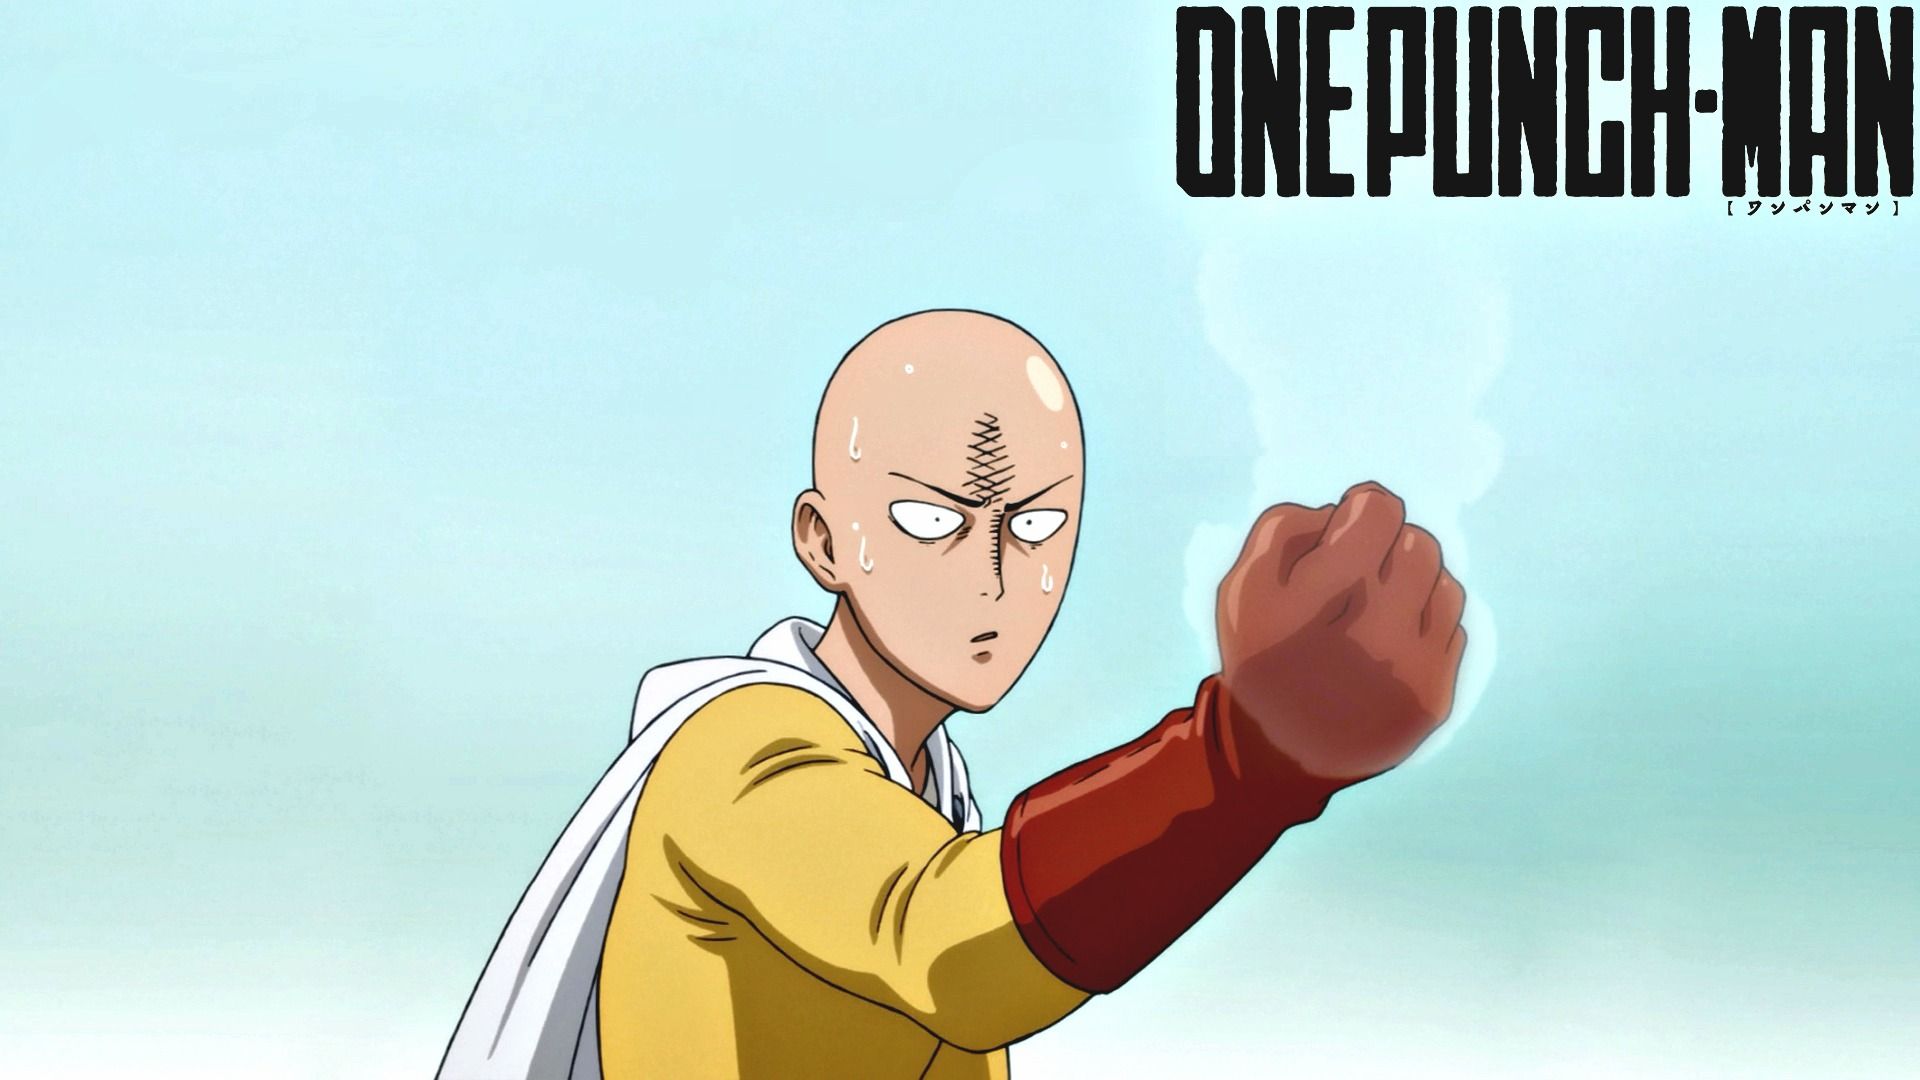 Some One Punch Man background for everyone